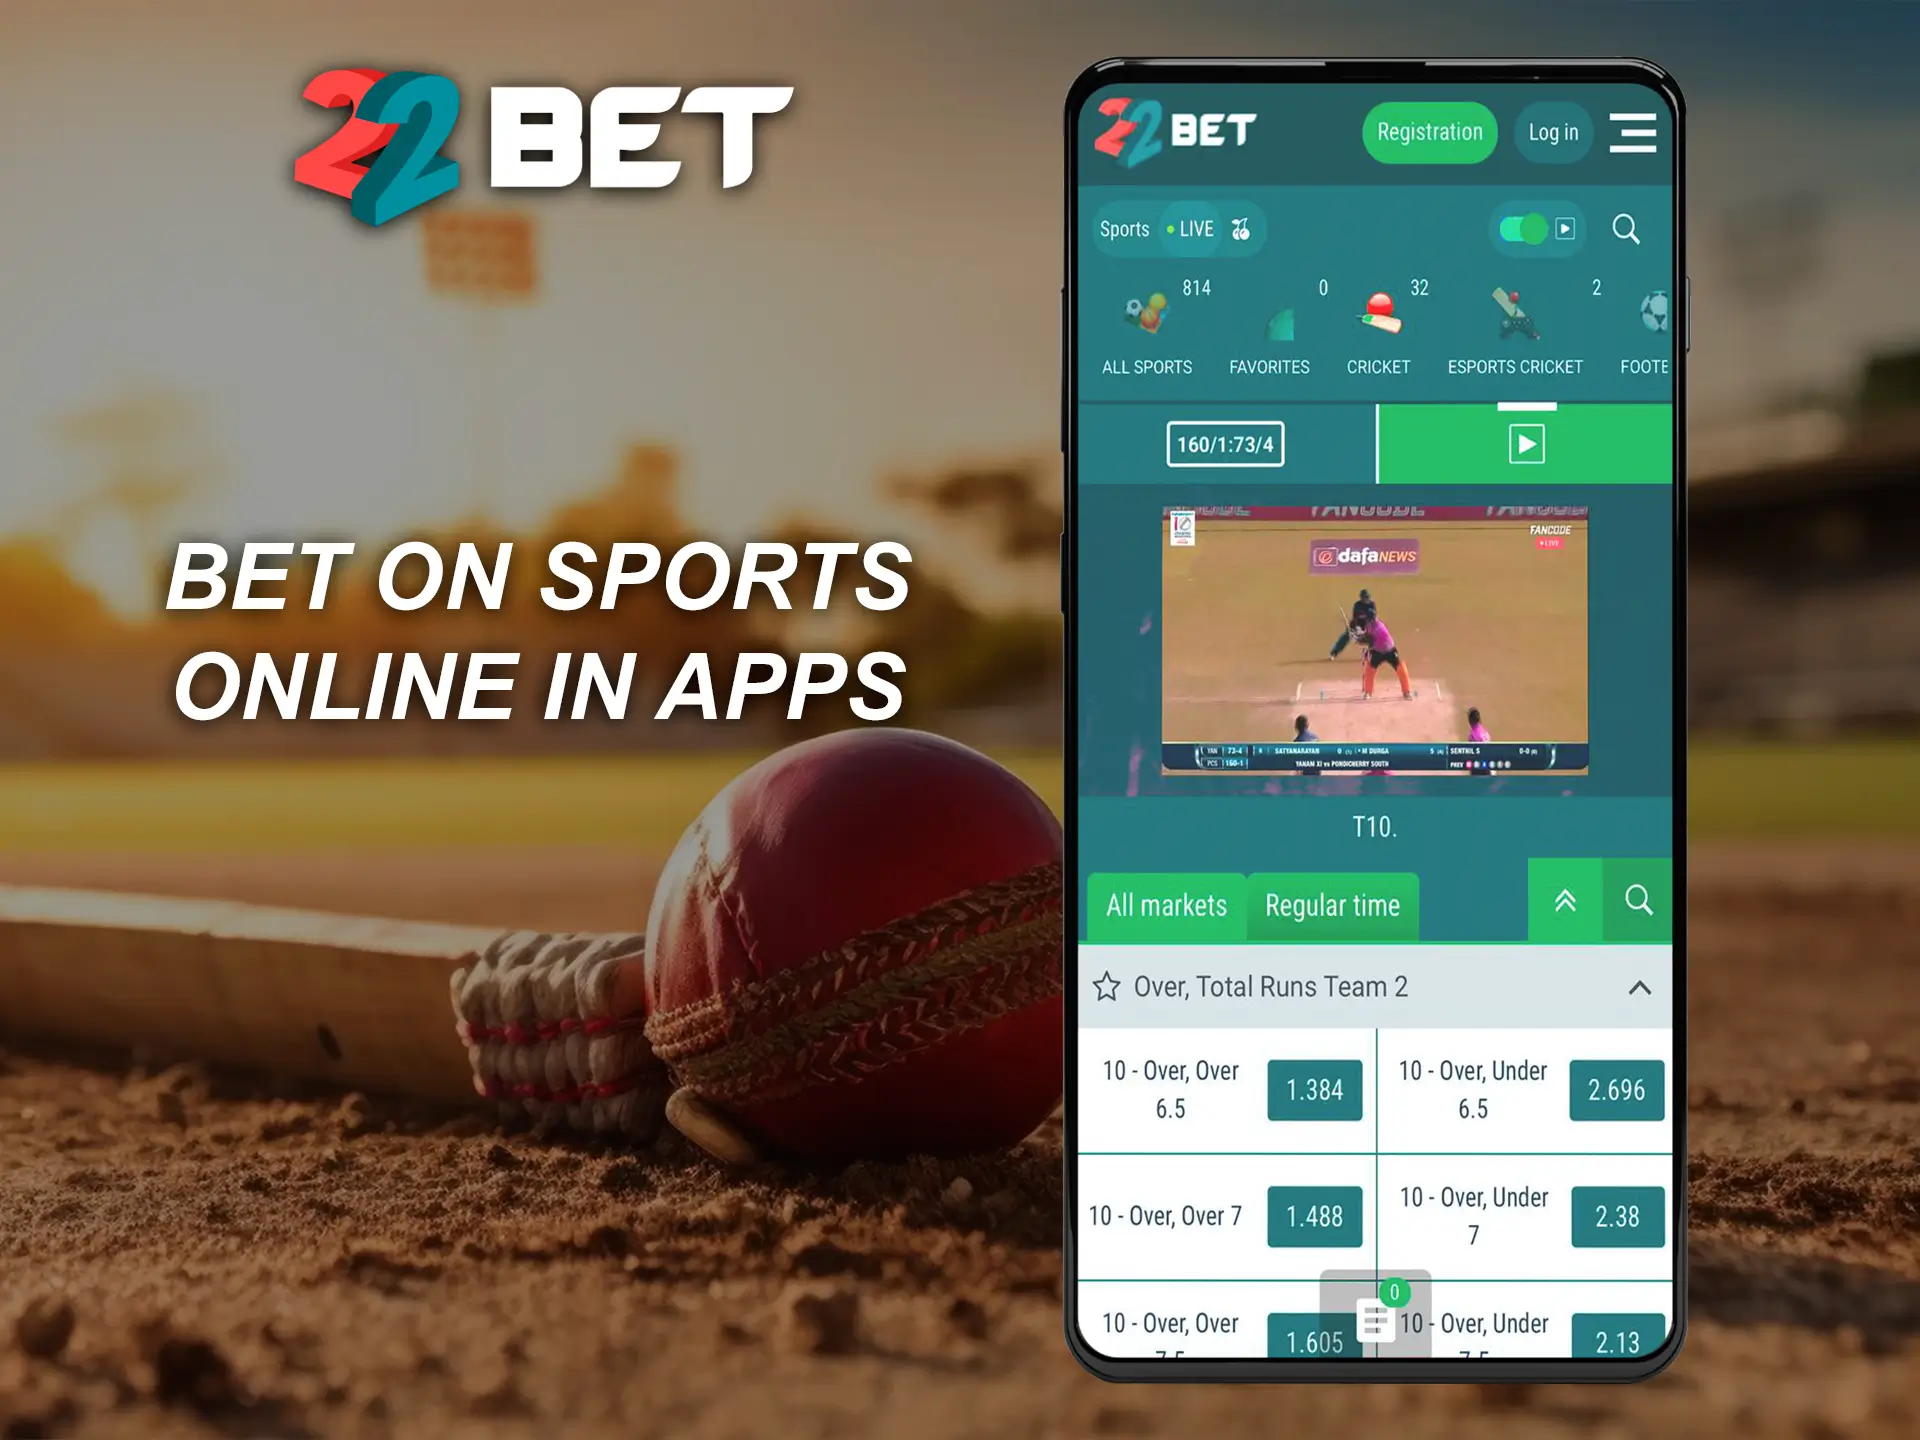 Using the 22bet app you also get the opportunity to watch the broadcast and bet online.